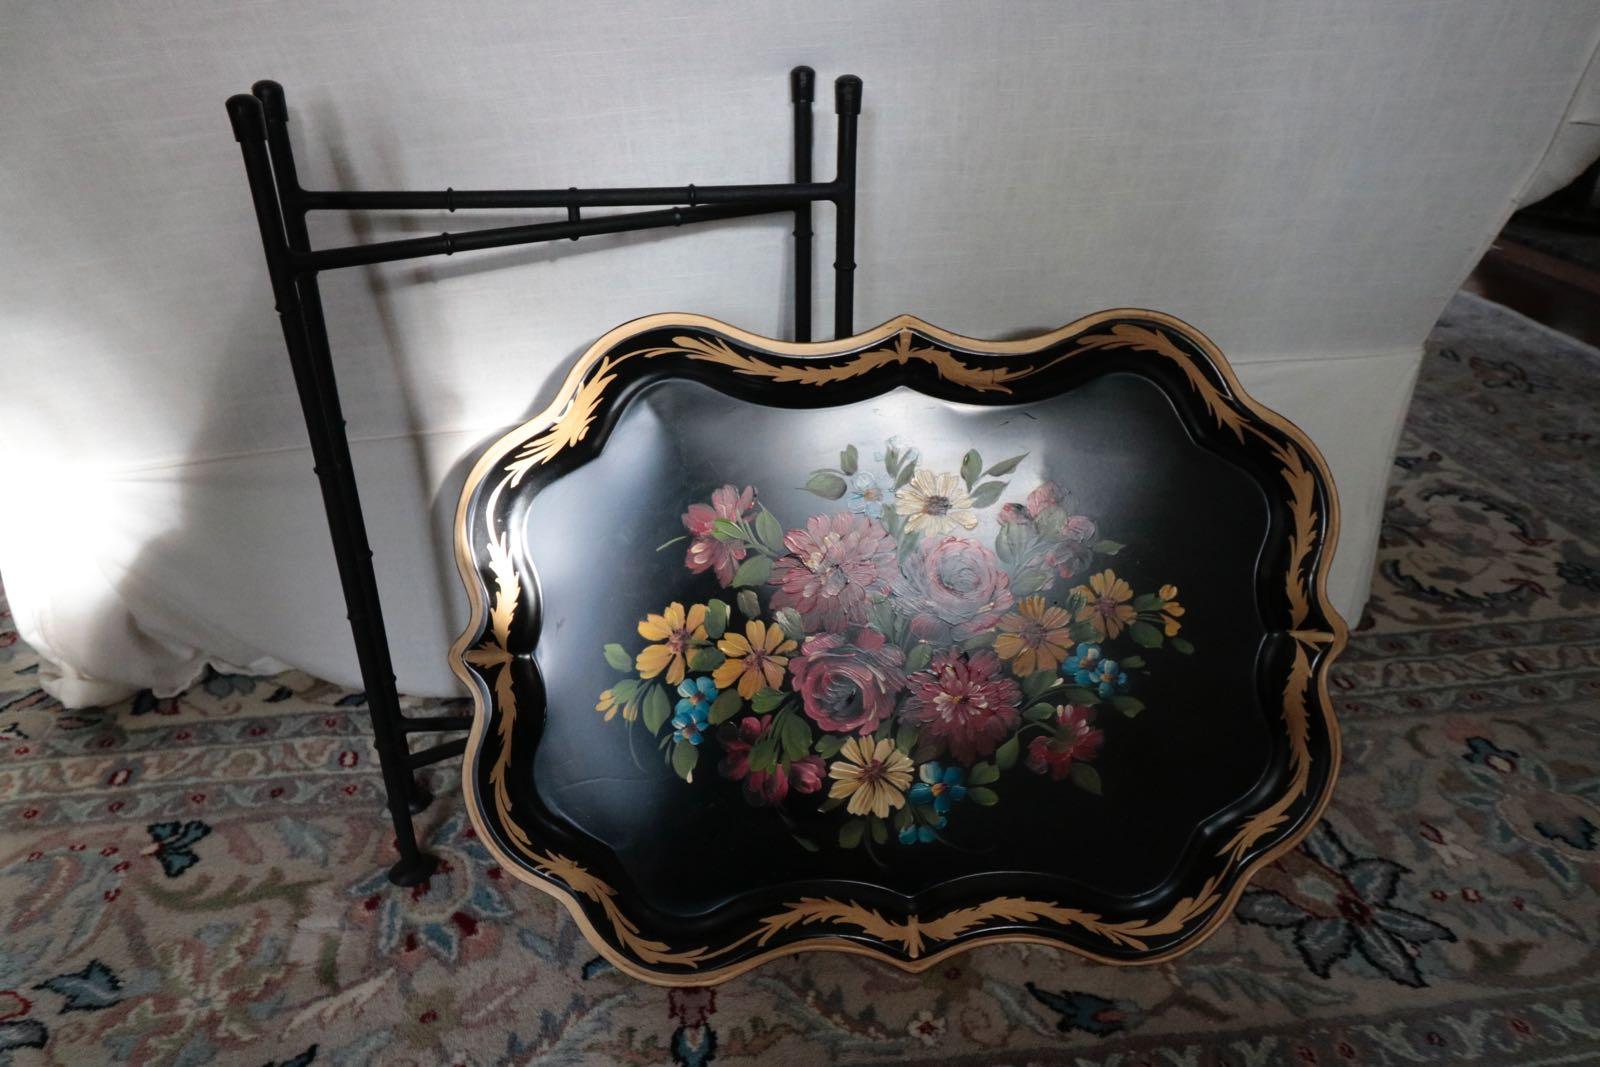 Fabulous vintage 1940s hand painted Dahlia's, roses, daisies, bluebells tin tray table. Black painted background subtle gilt border. Perfect size for cocktails or tea.